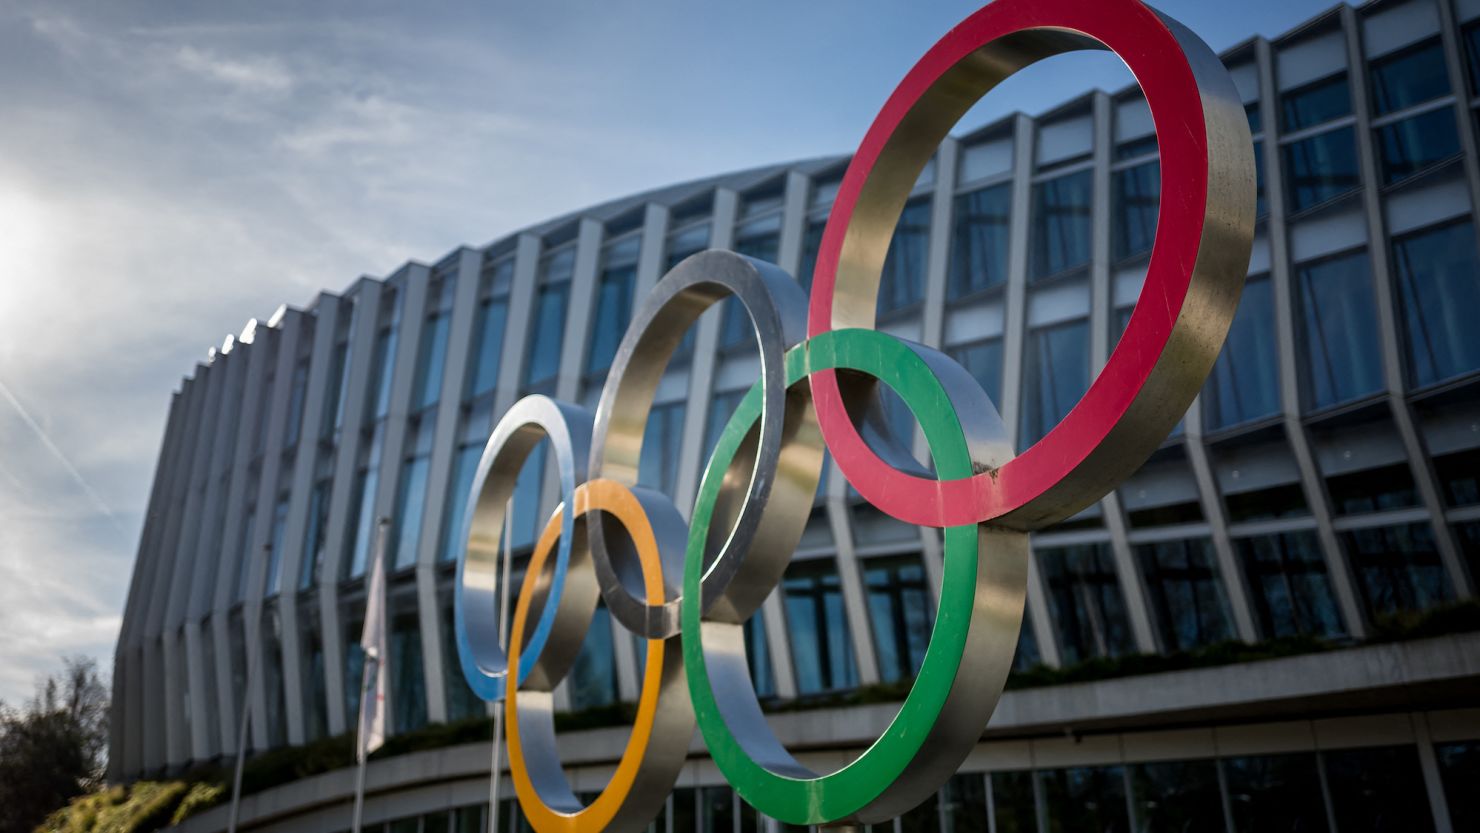 This year's Olympics get underway on July 26.